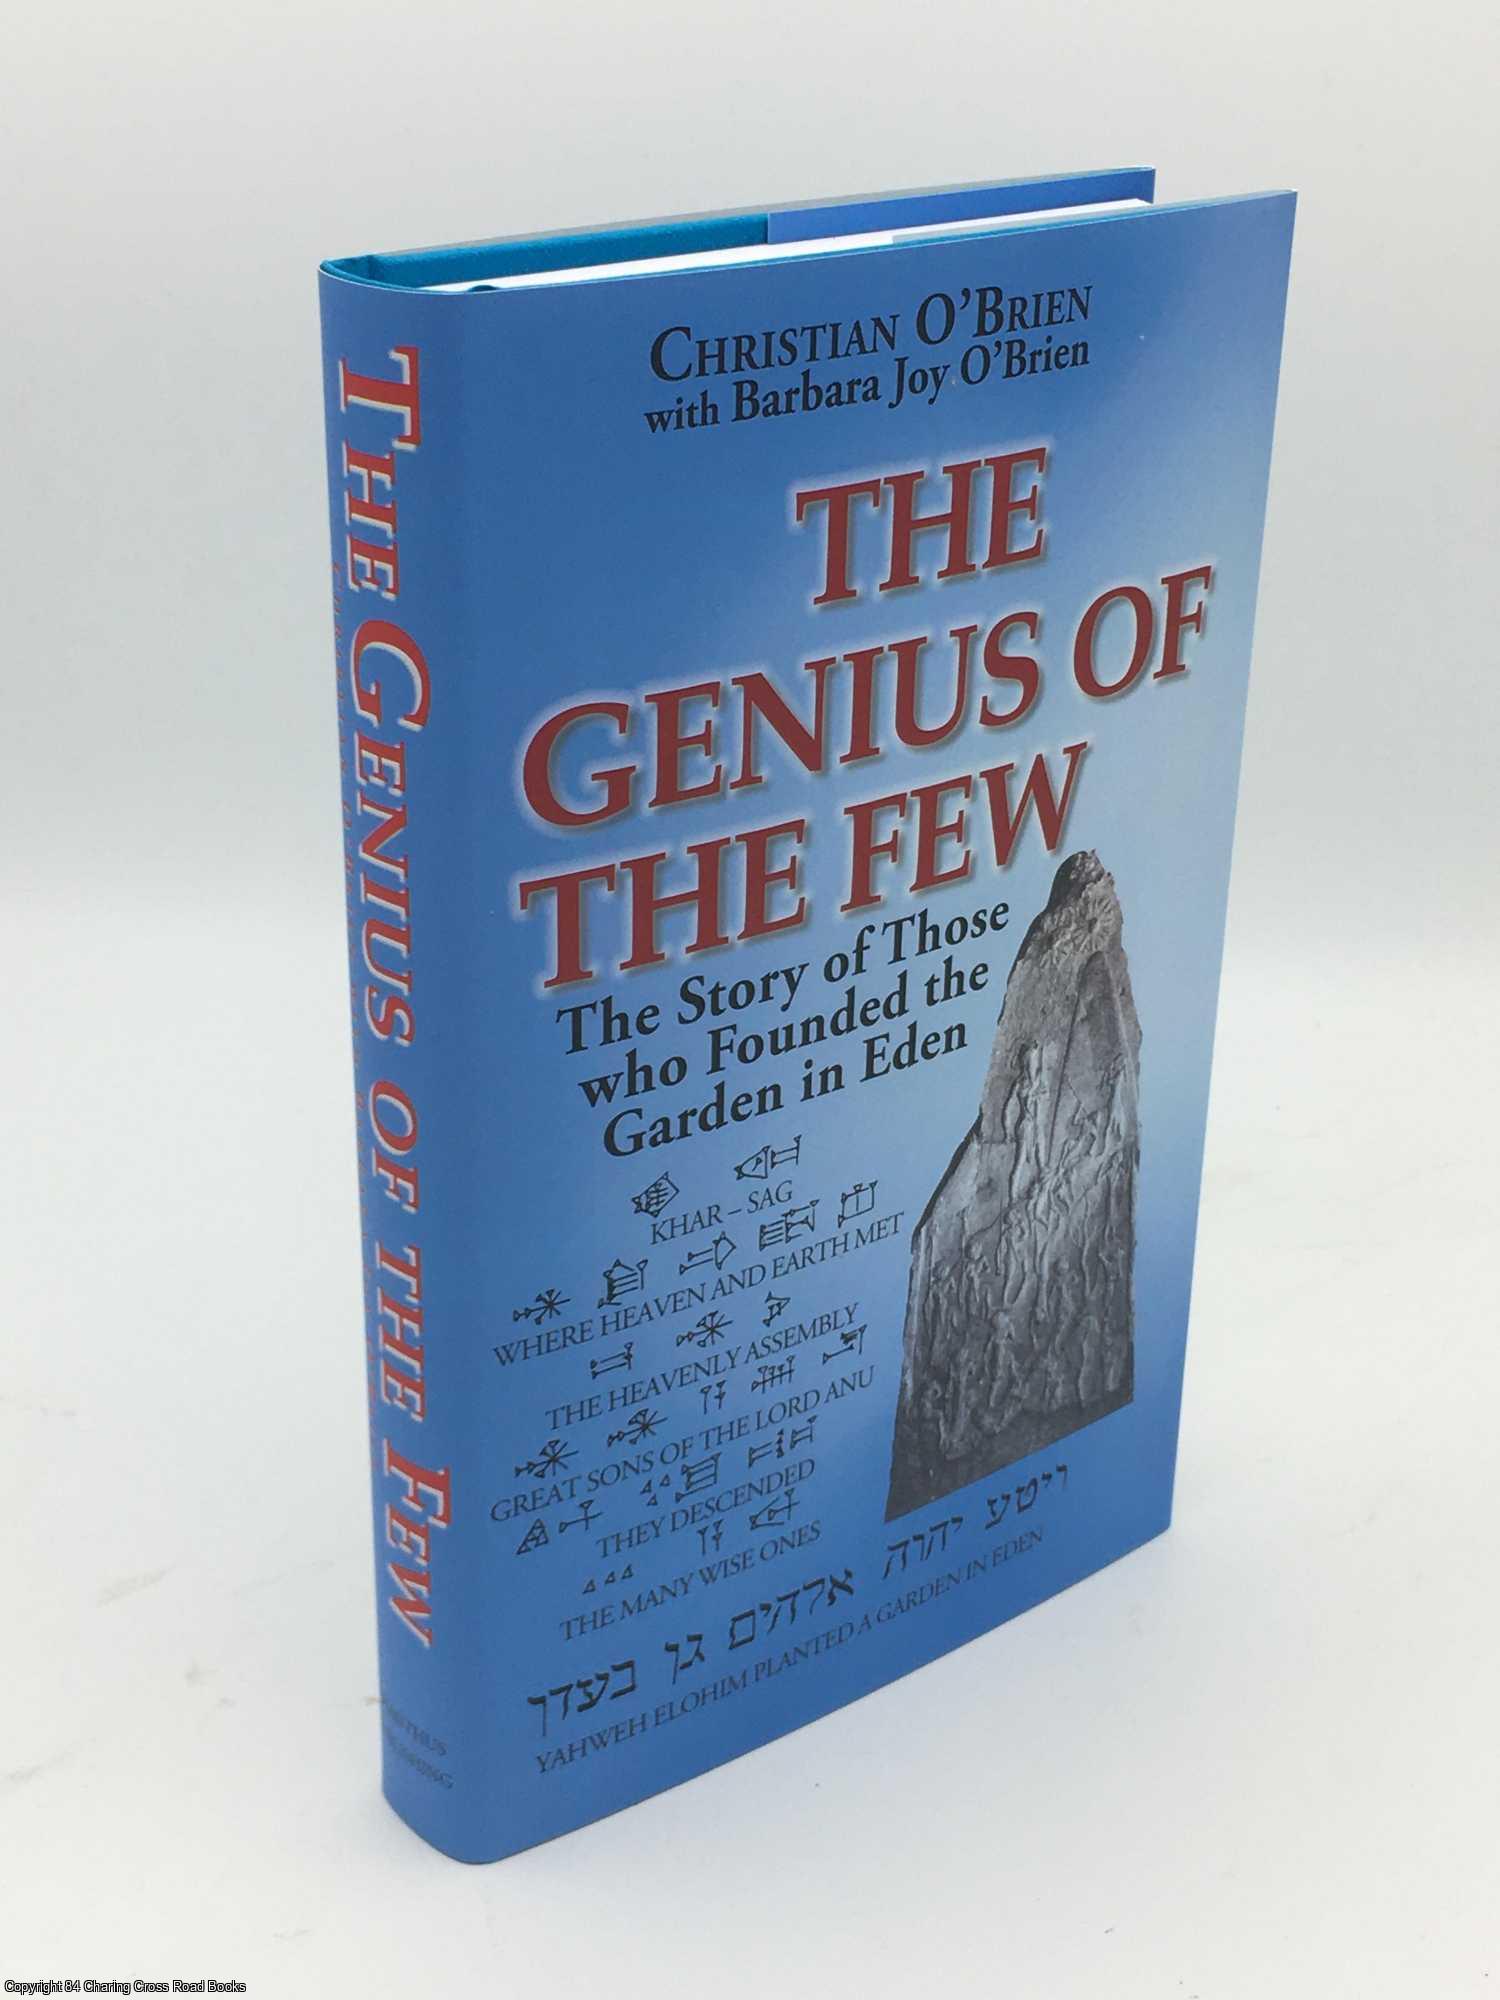 O'Brien, Christian - Genius of the Few: The Story of Those Who Founded the Garden in Eden